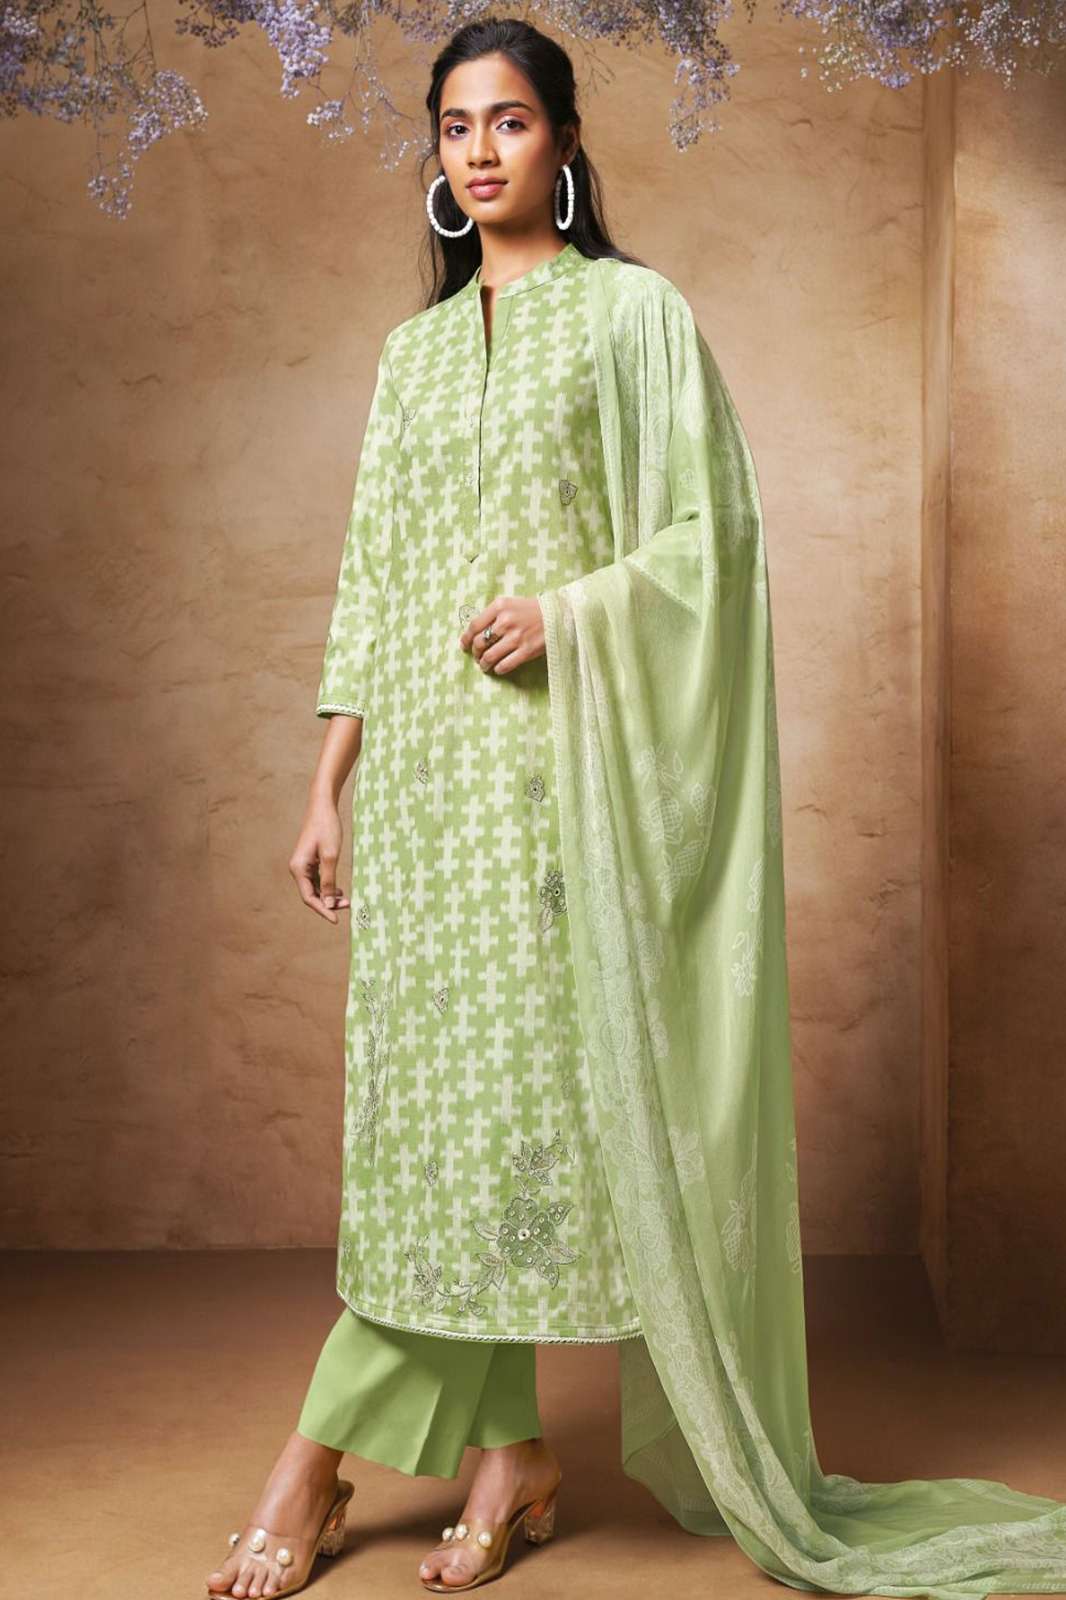 Ganga Valerie 2306 COTTON PRINTED WITH EMBROIDERY, HAND WORK ON FRONT AND COTTON DAMAN LACE SUIT